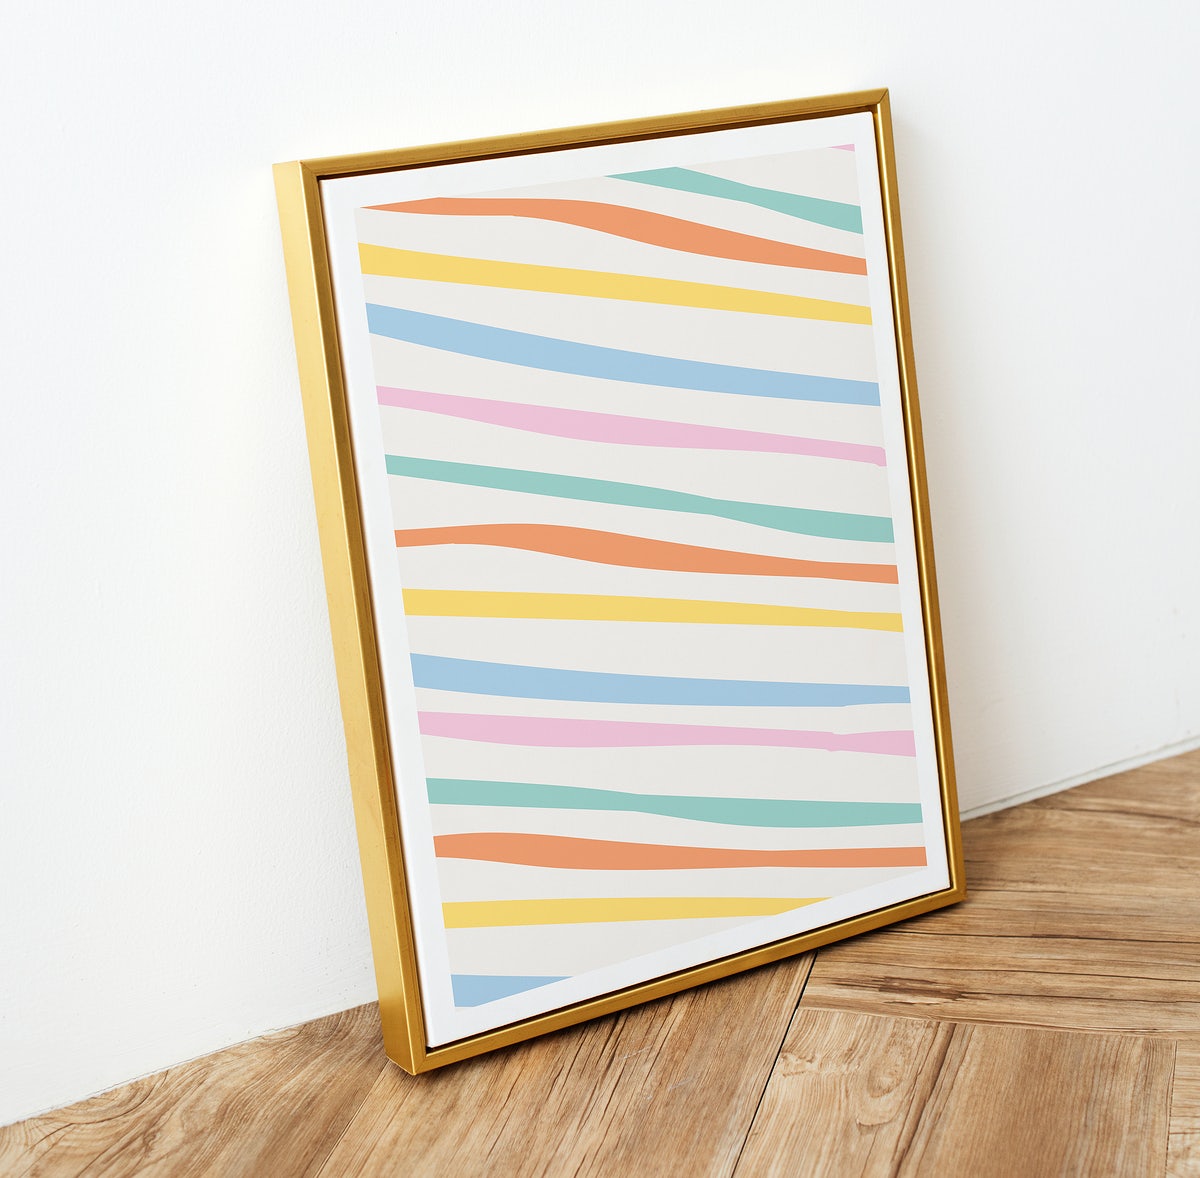 Free Picture Frame Mockup Psd On Wooden Floor With Pastel Stripes Image